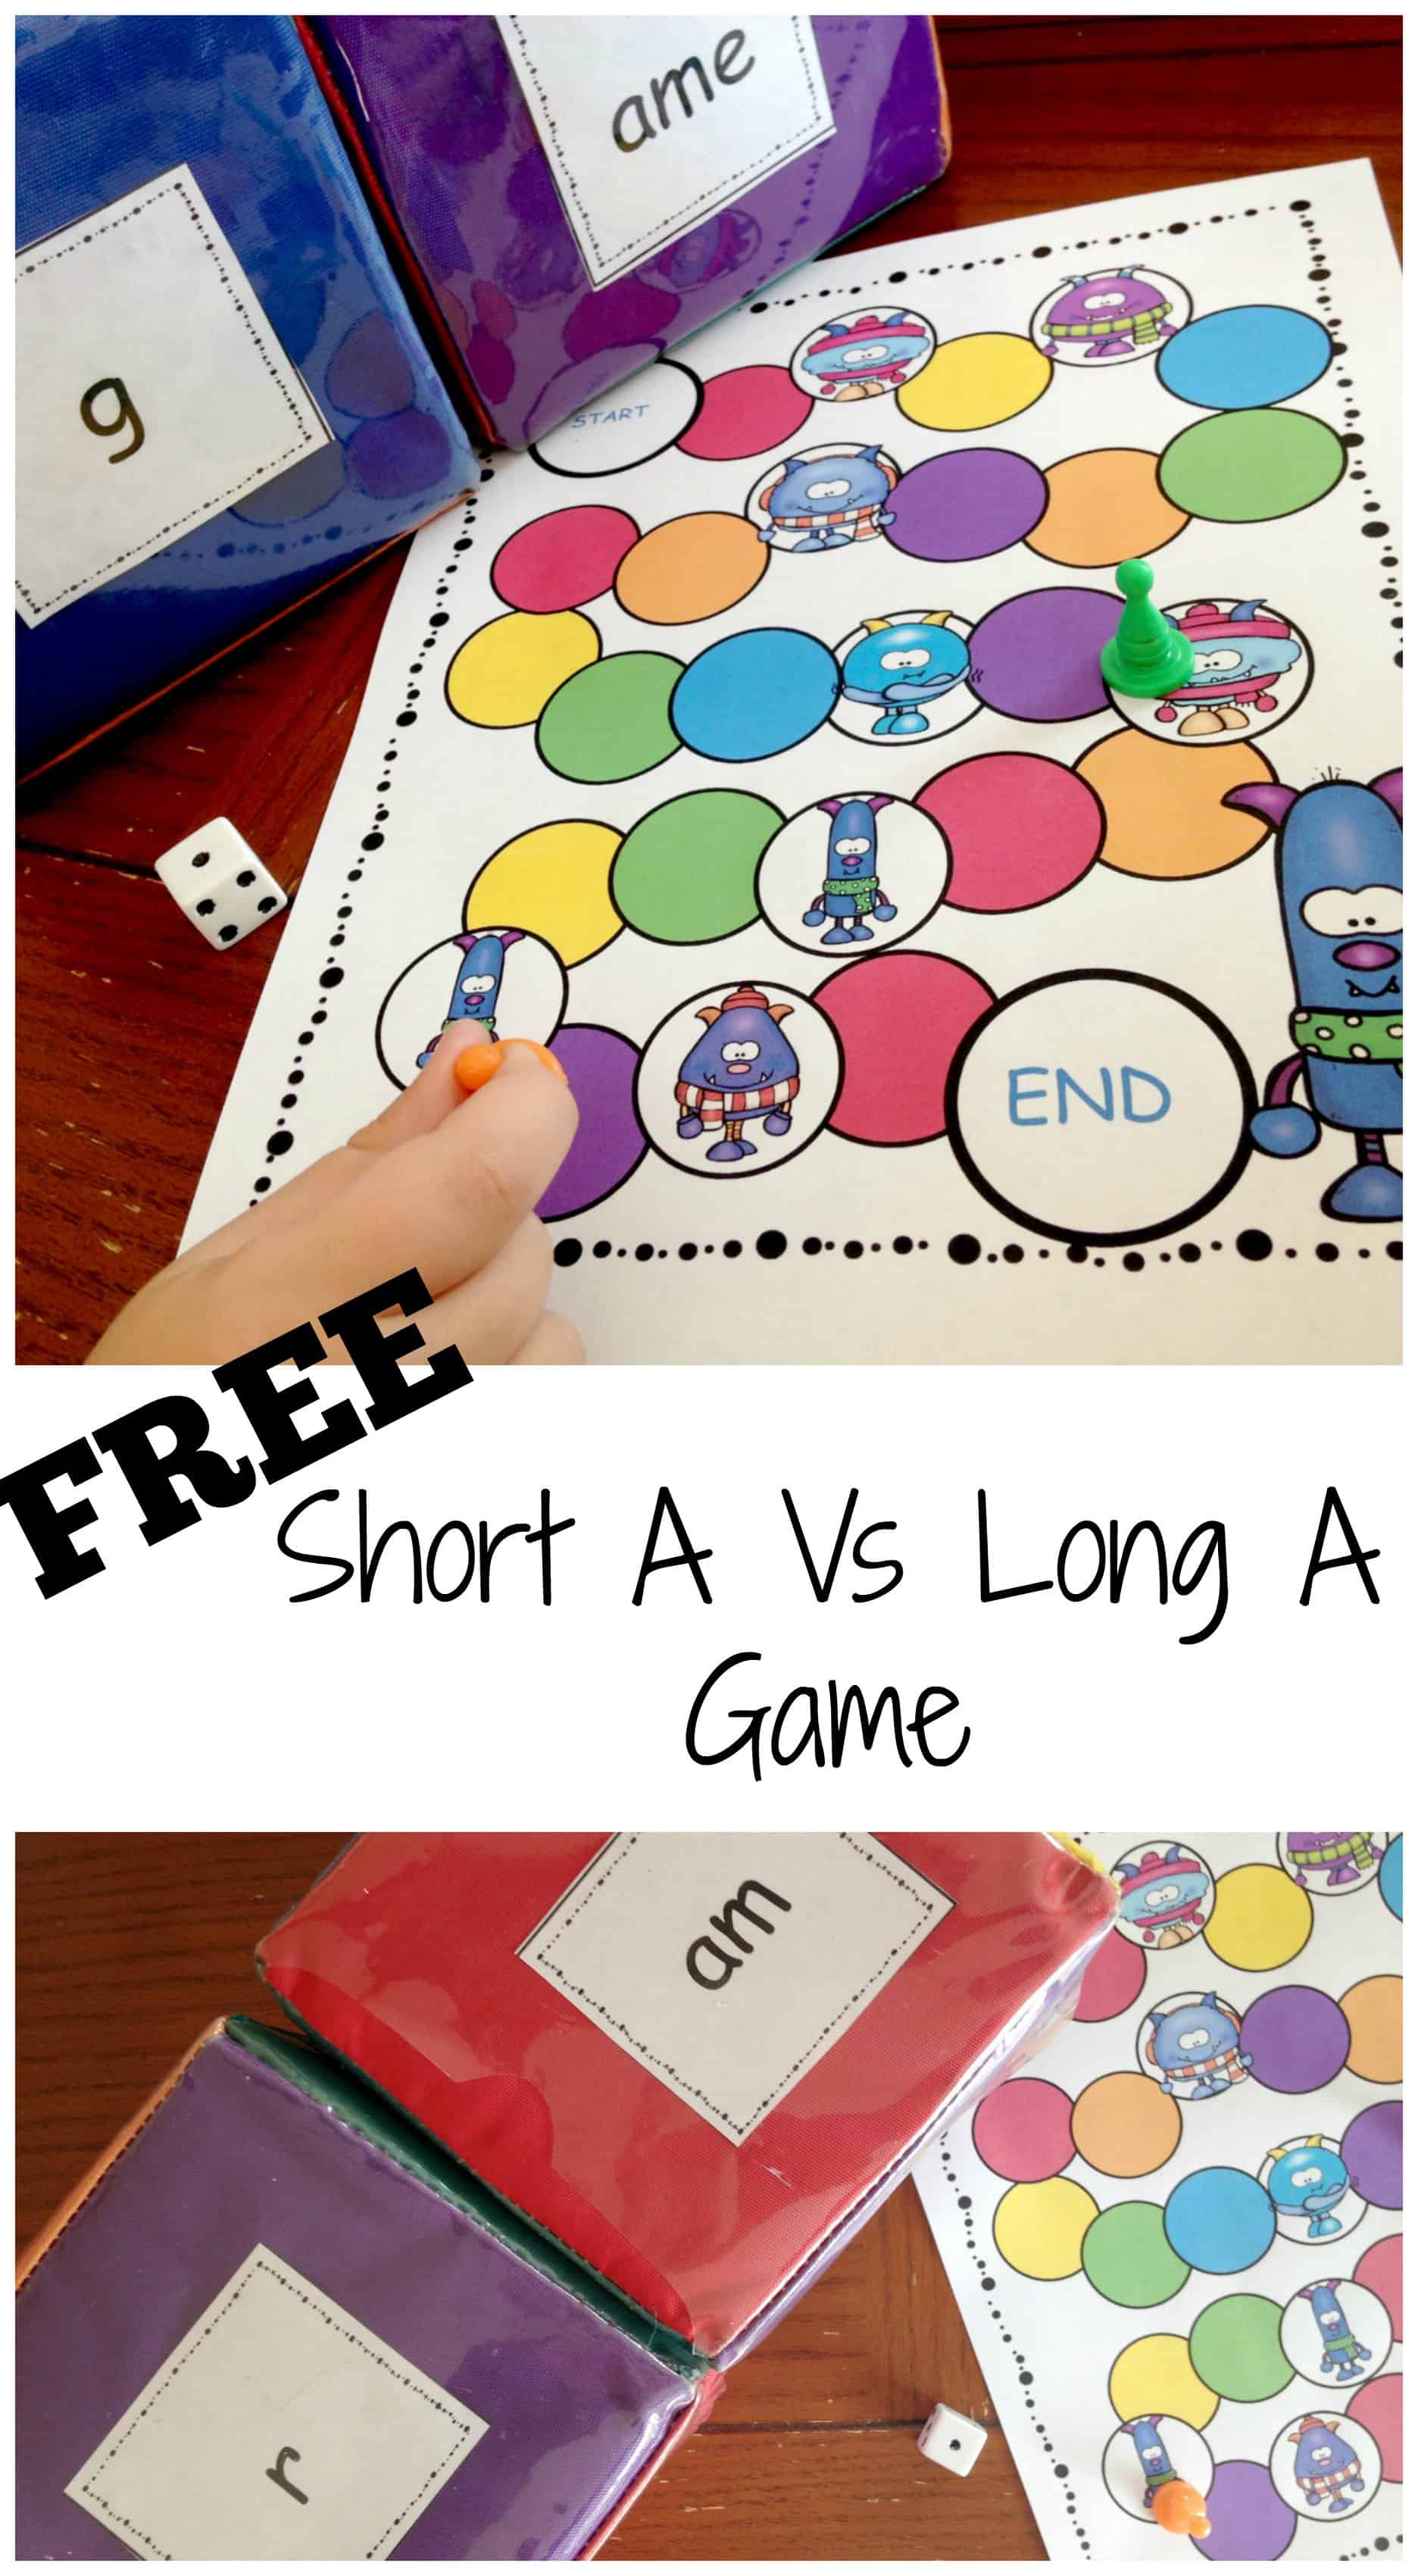 Short A vs Long A game on a wooden table with dice and playing pieces. 